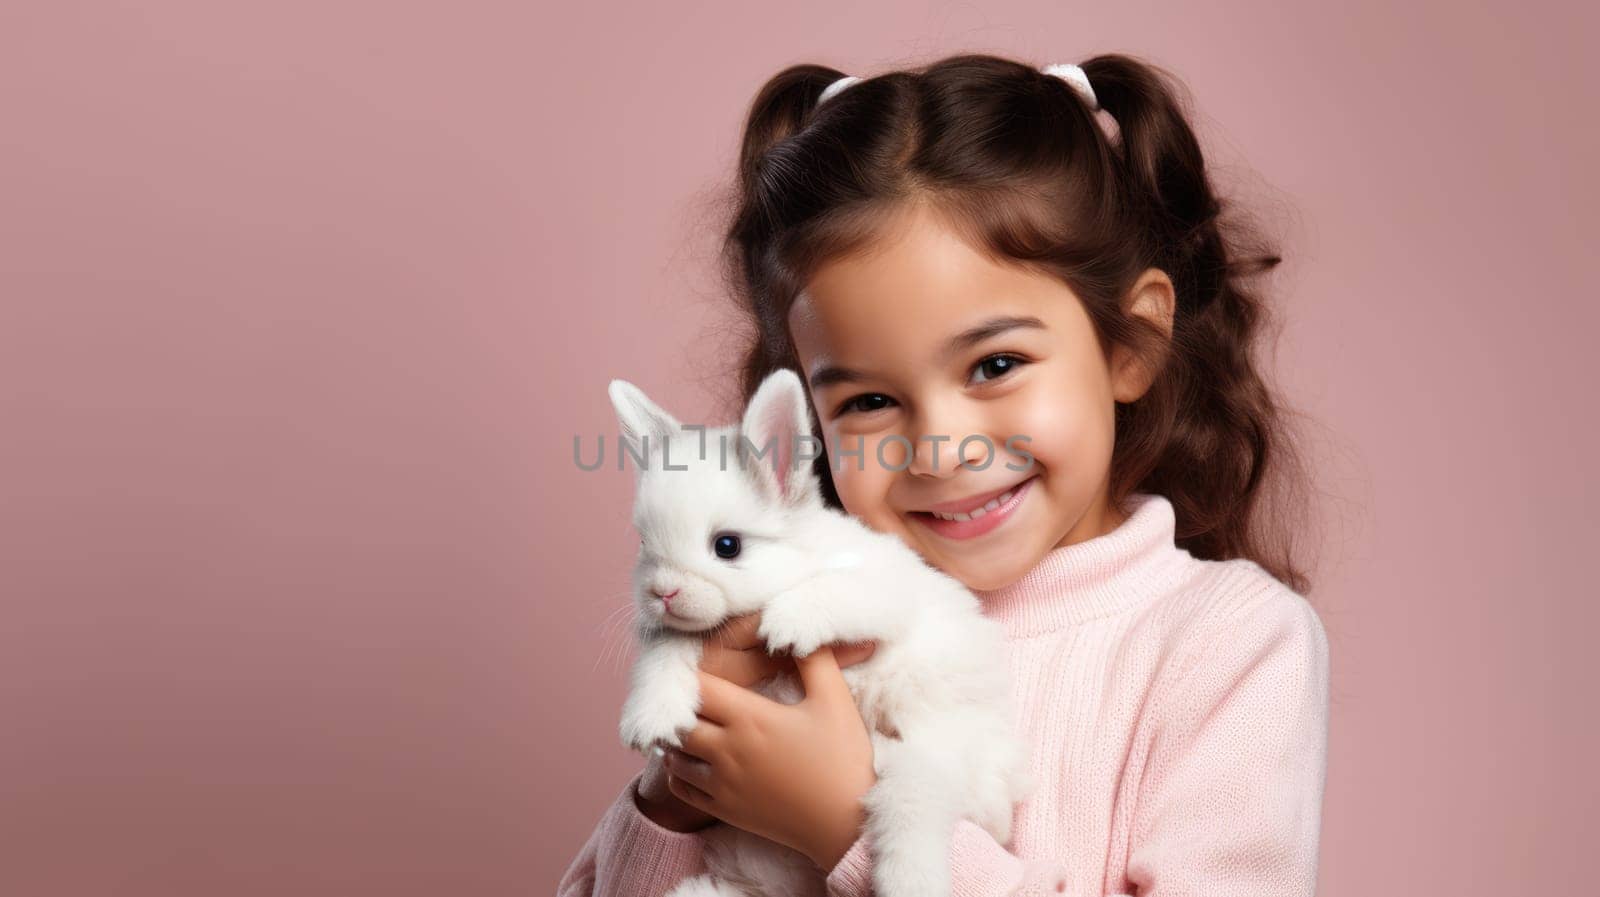 Little girl holding a white Easter bunny close to her chest, smiling at the camera with joy. by JuliaDorian